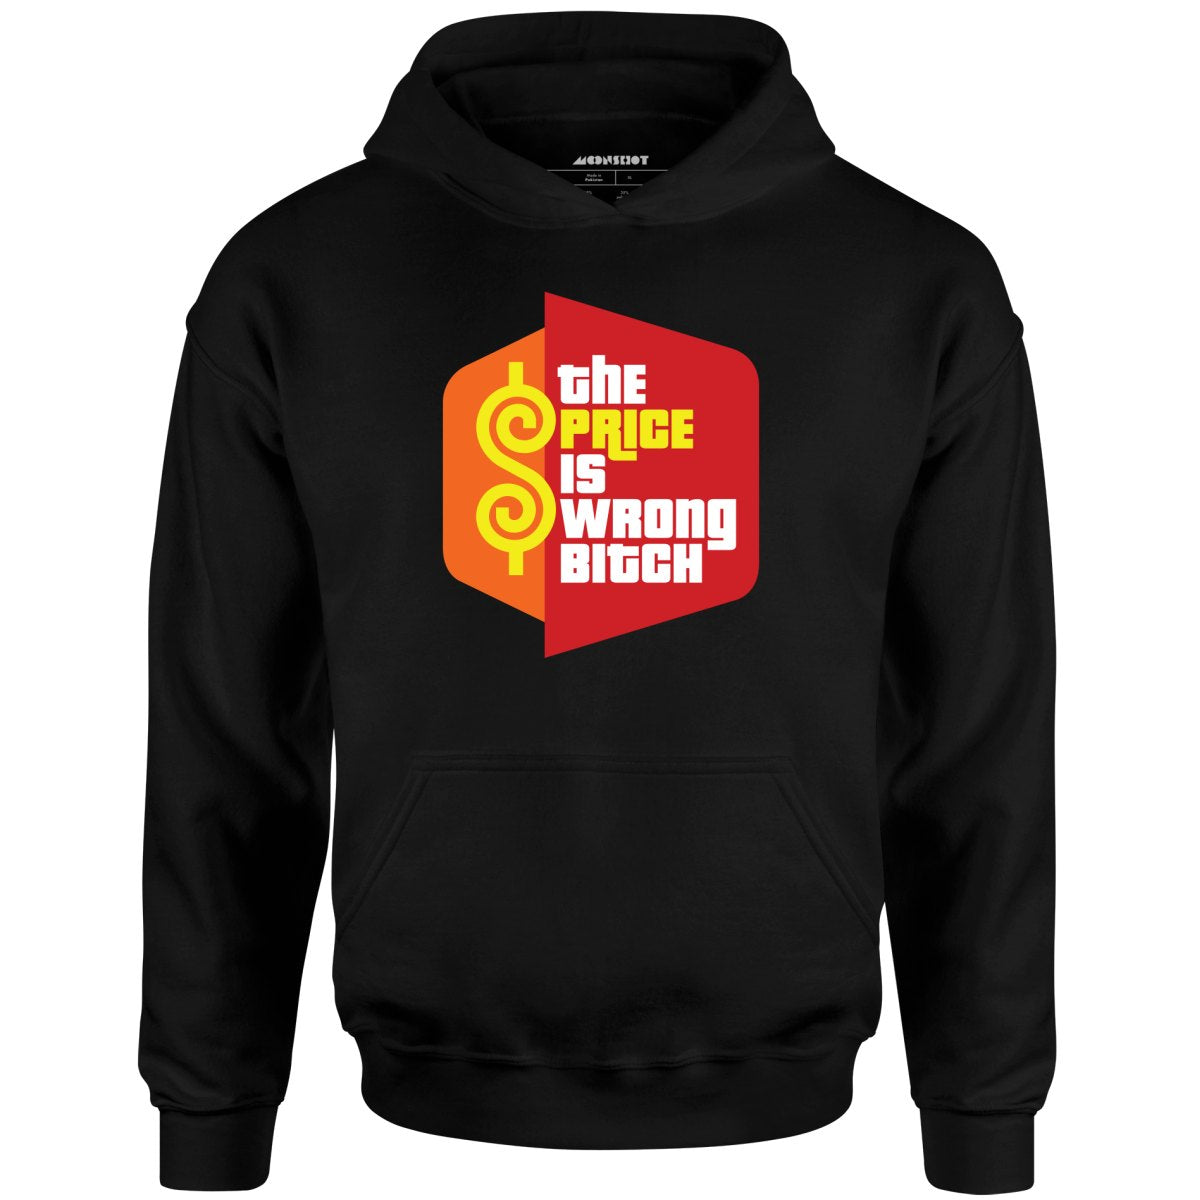 The Price is Wrong Bitch - Unisex Hoodie